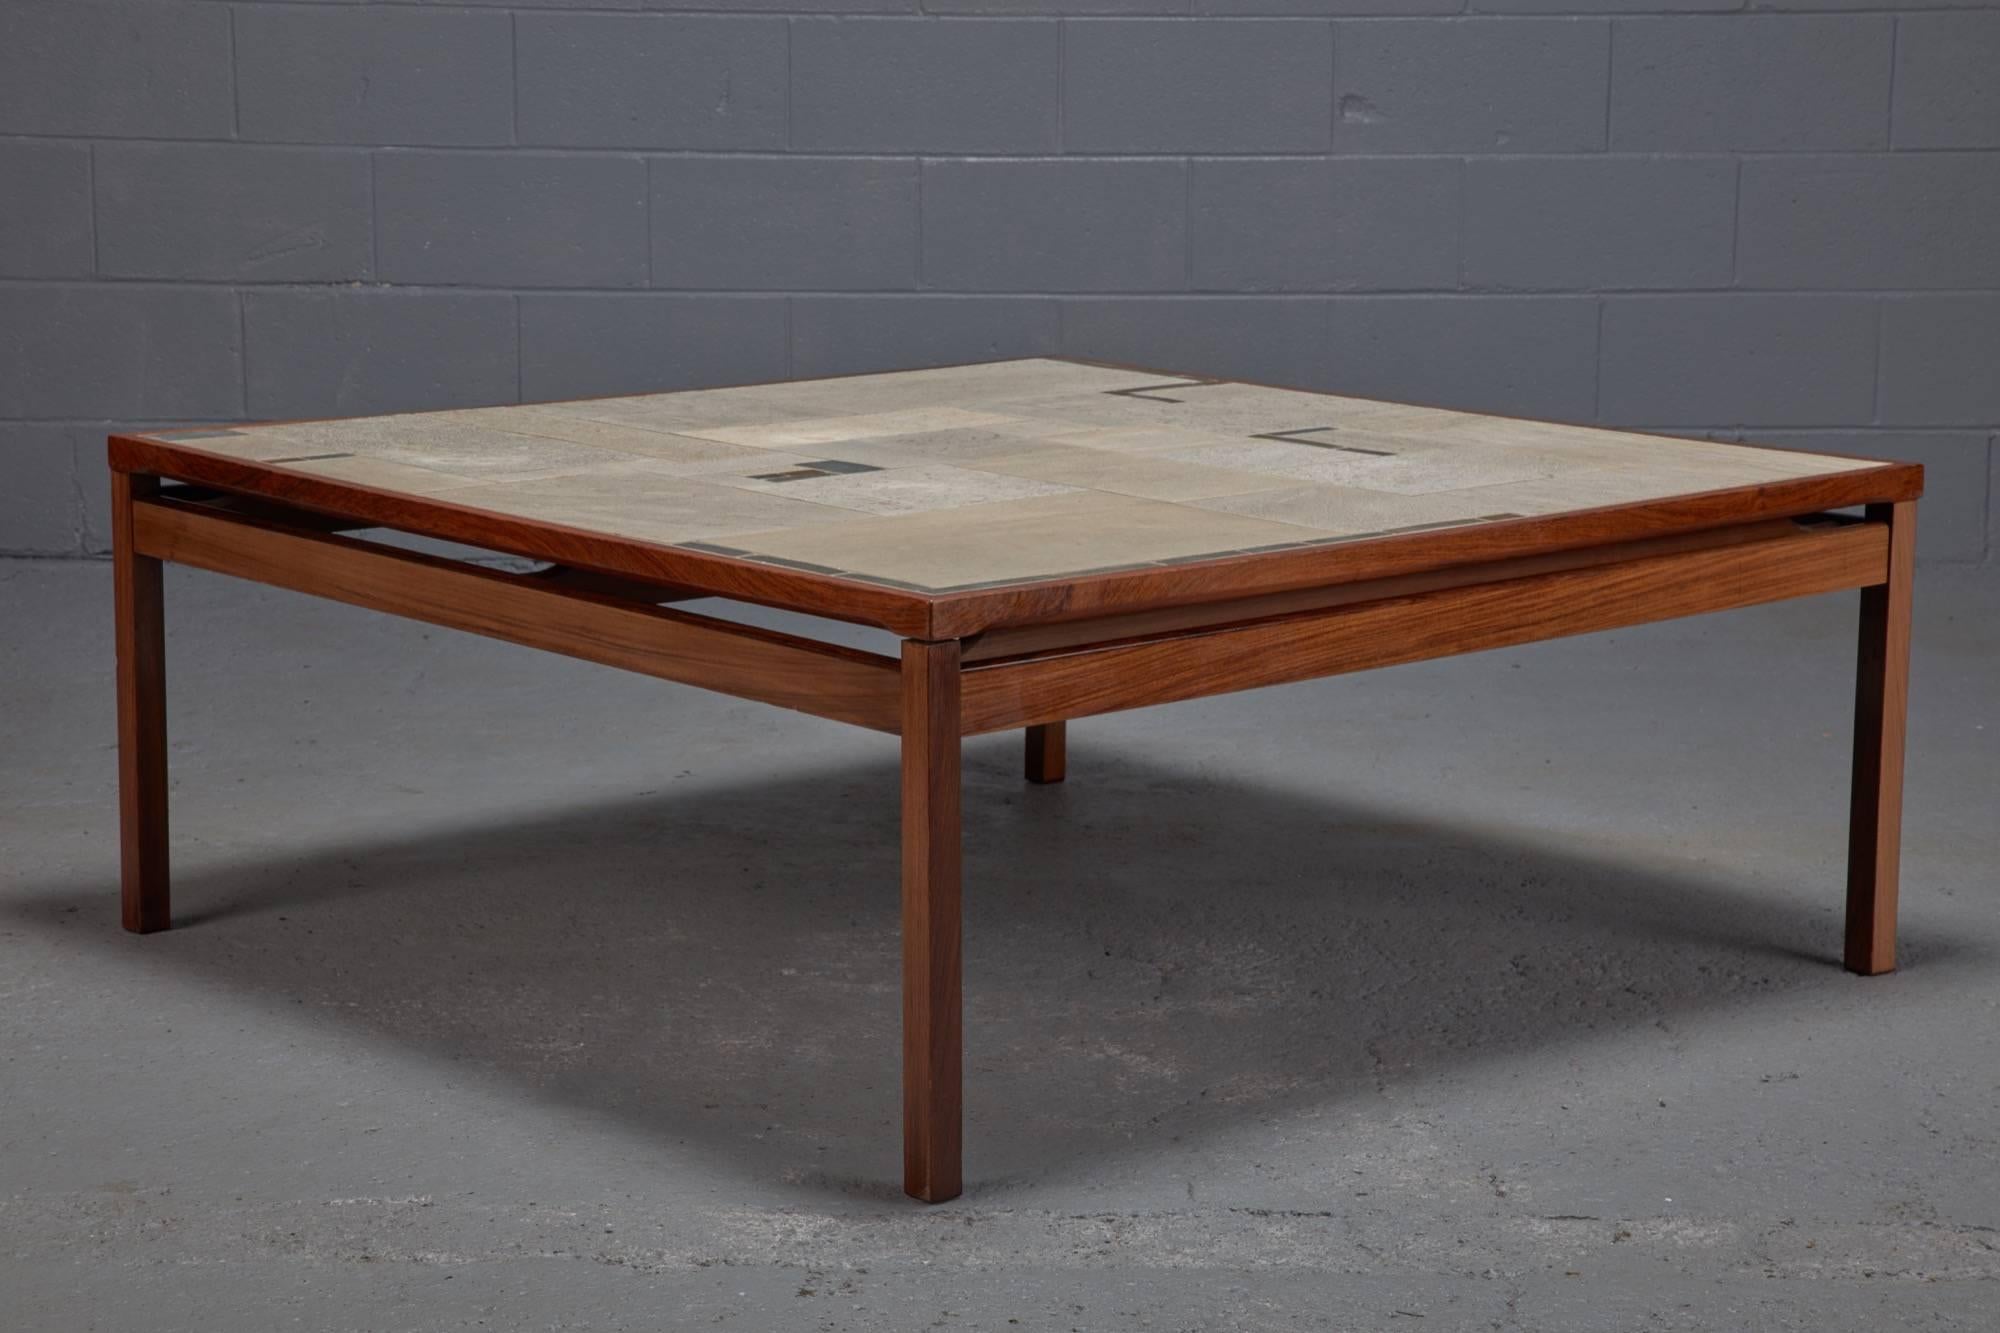 Large Danish modern mid-century rosewood and tile coffee table.